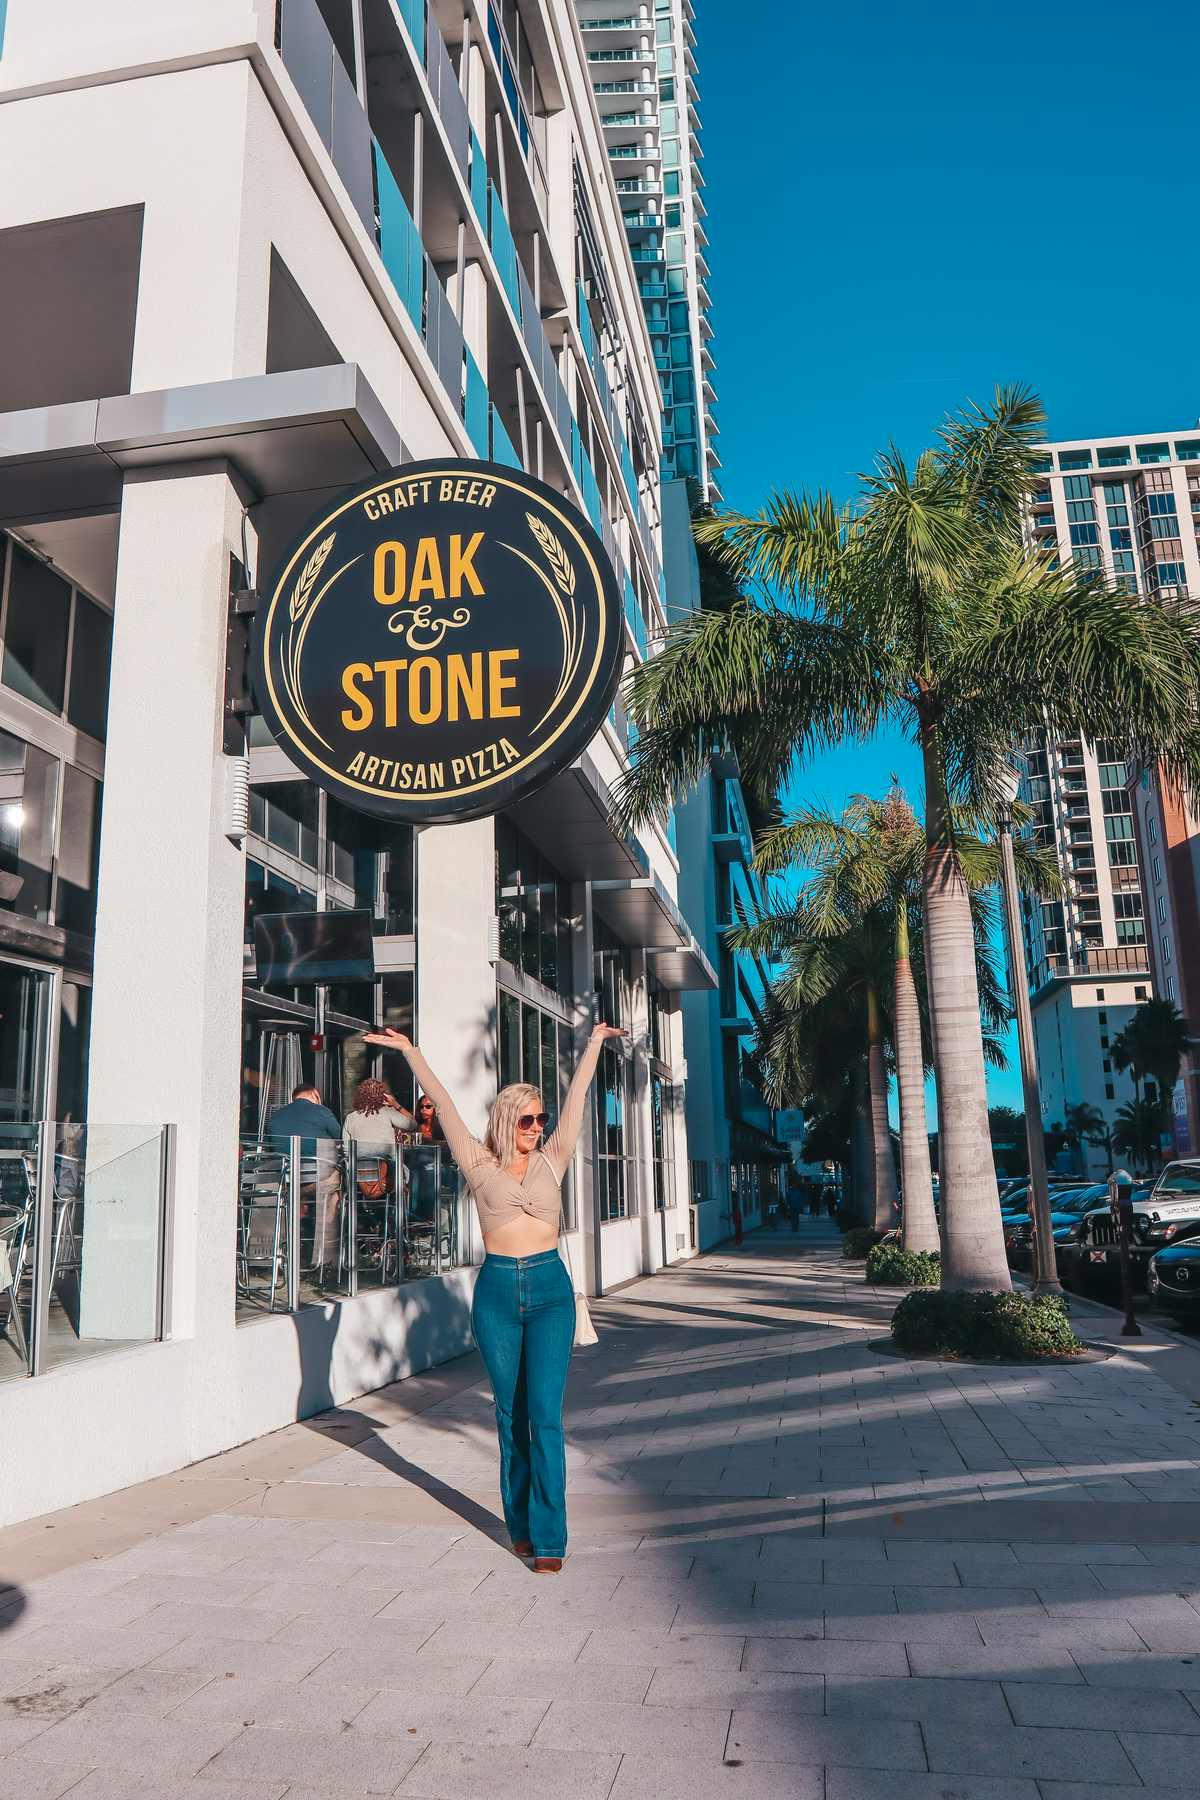 Oak and Stone restaurant in downtown St Pete